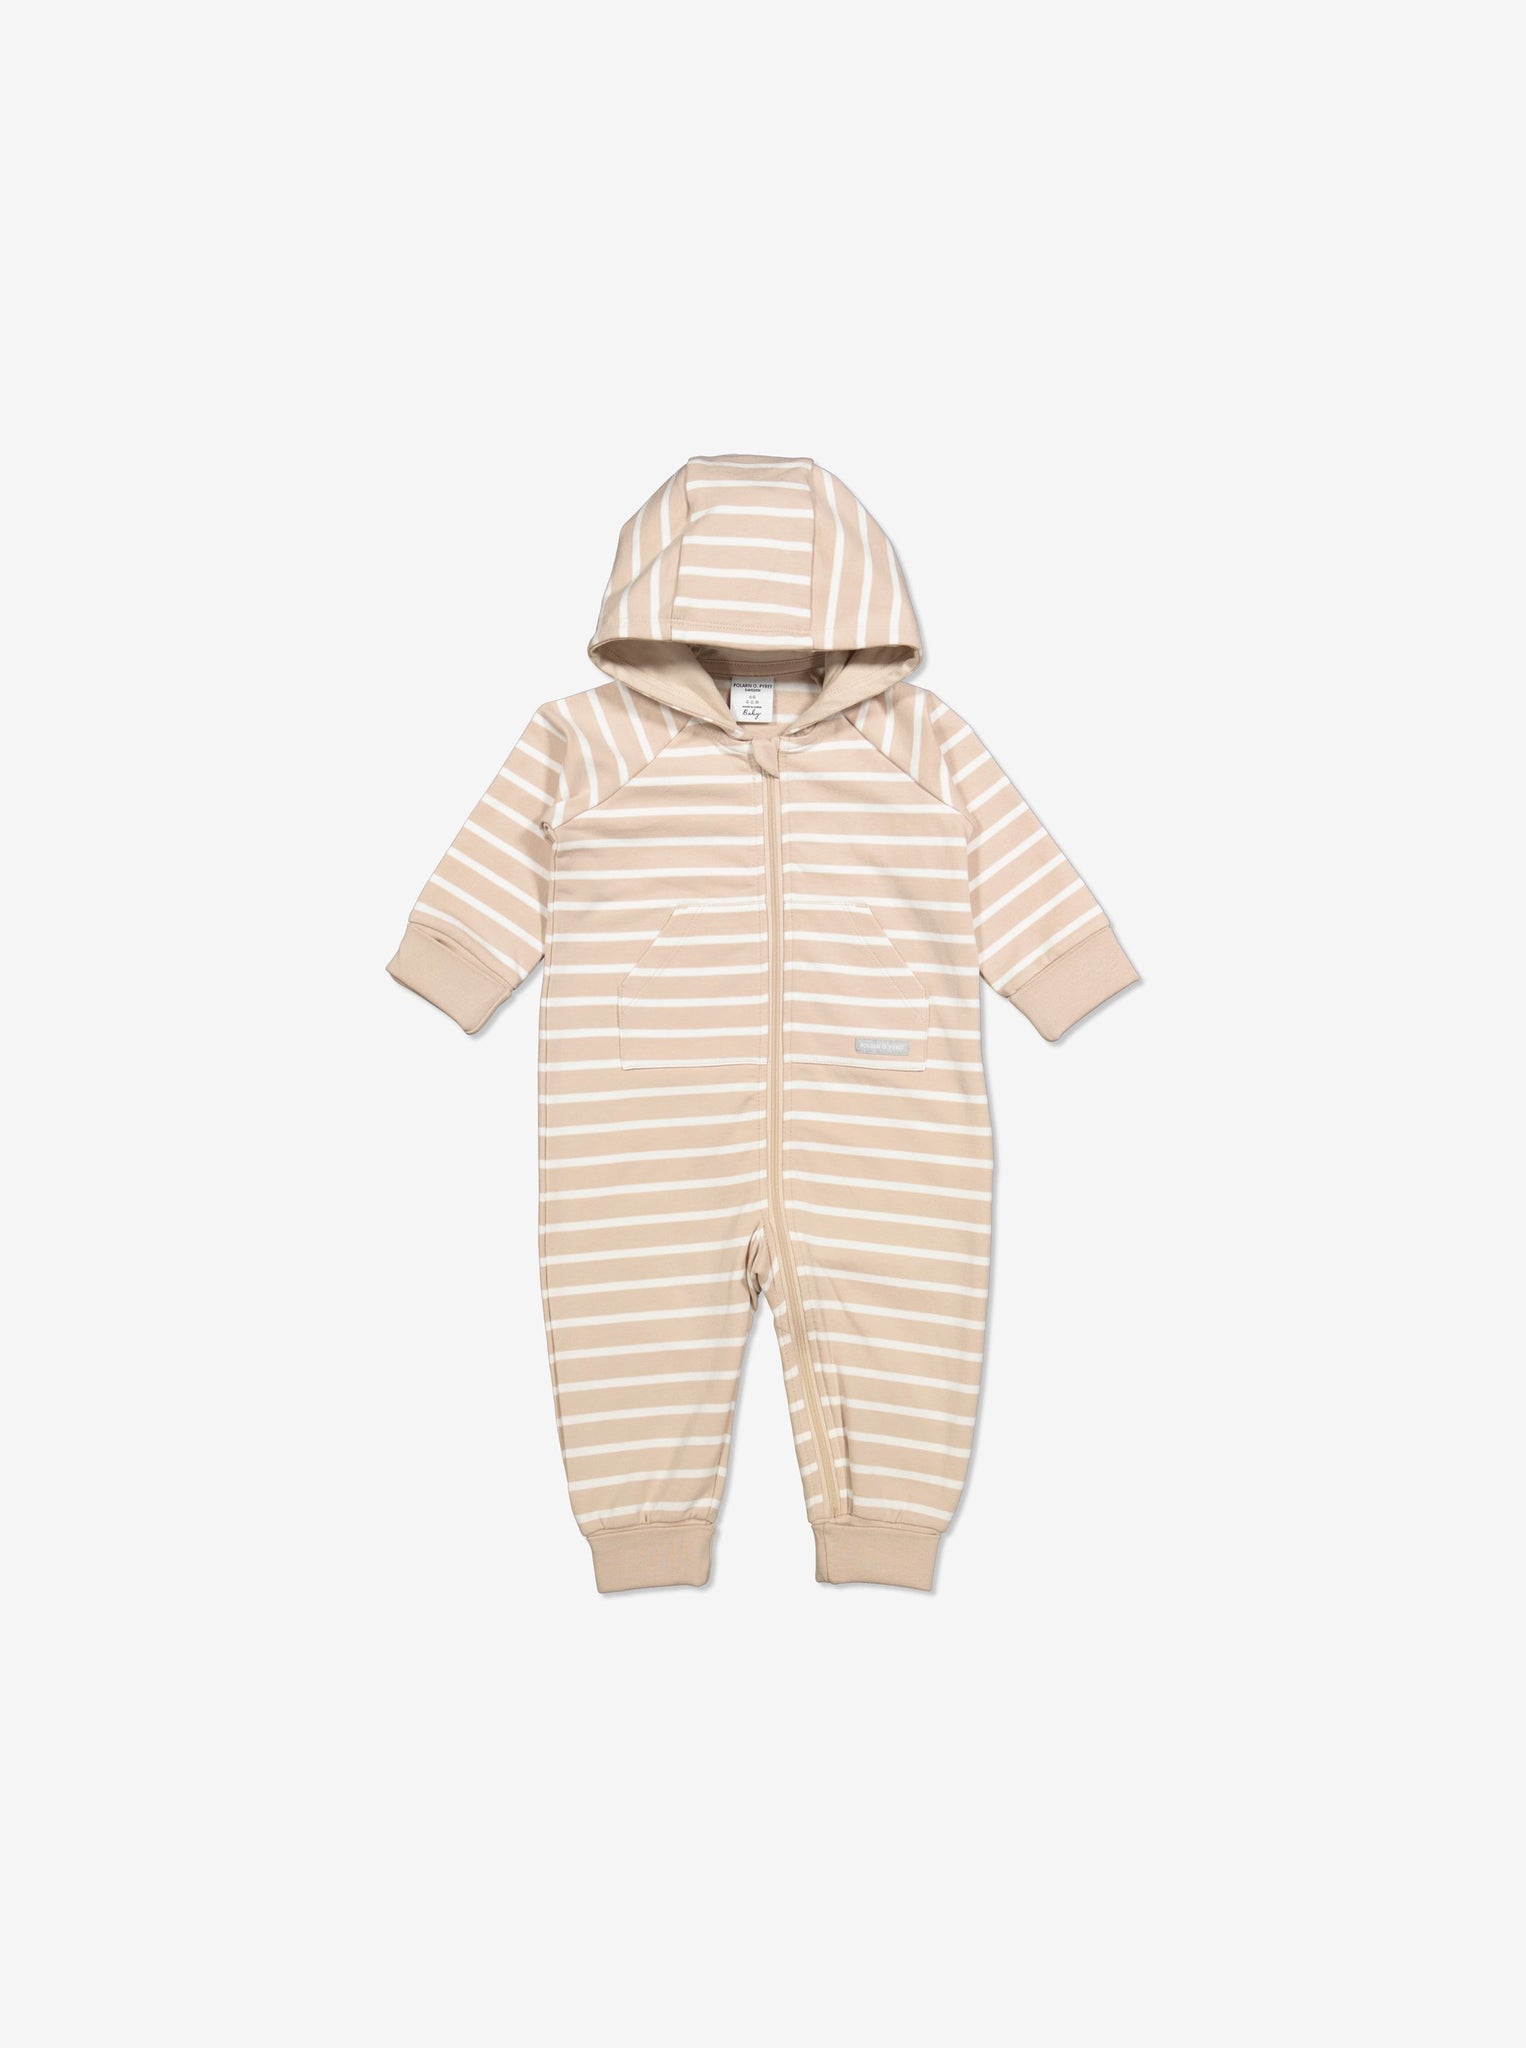  Organic Striped Beige Babygrow from Polarn O. Pyret Kidswear. Made from eco-friendly materials.